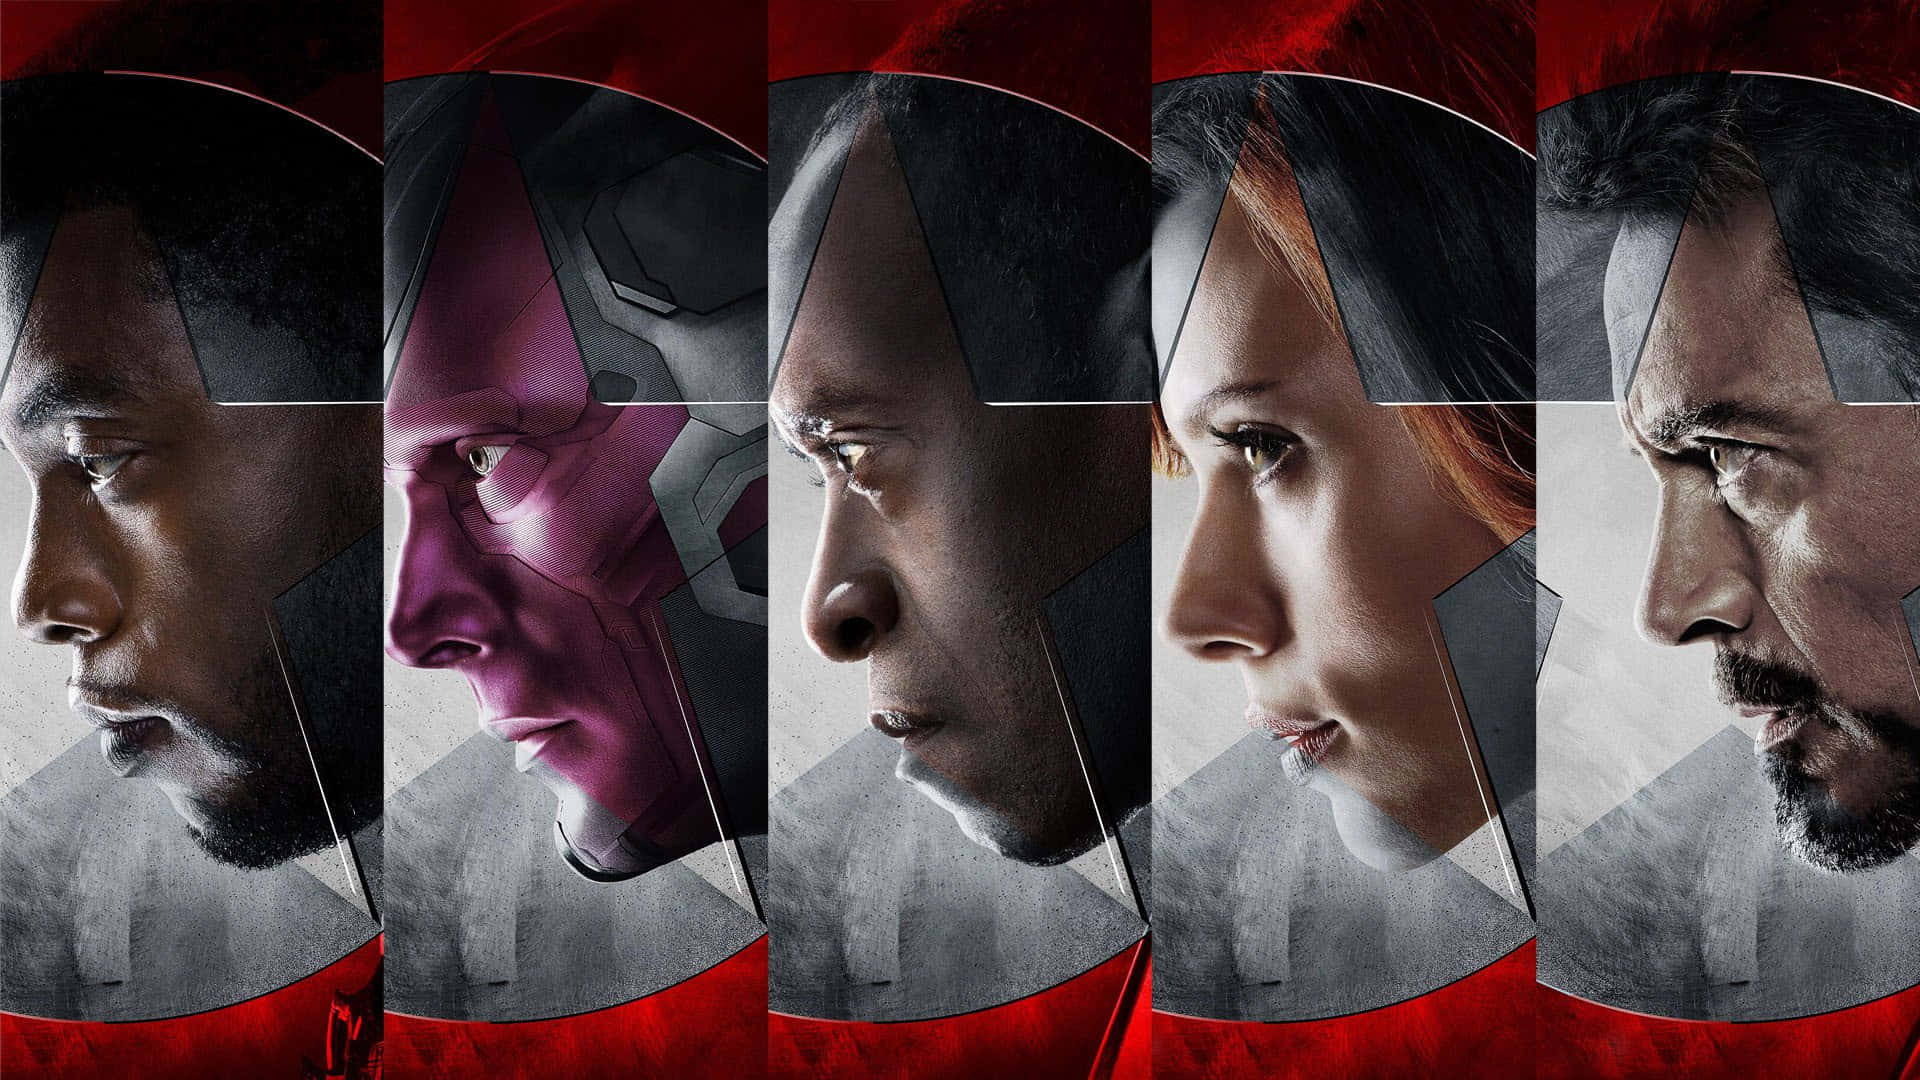 "Vision and the Avengers united against evil forces." Wallpaper